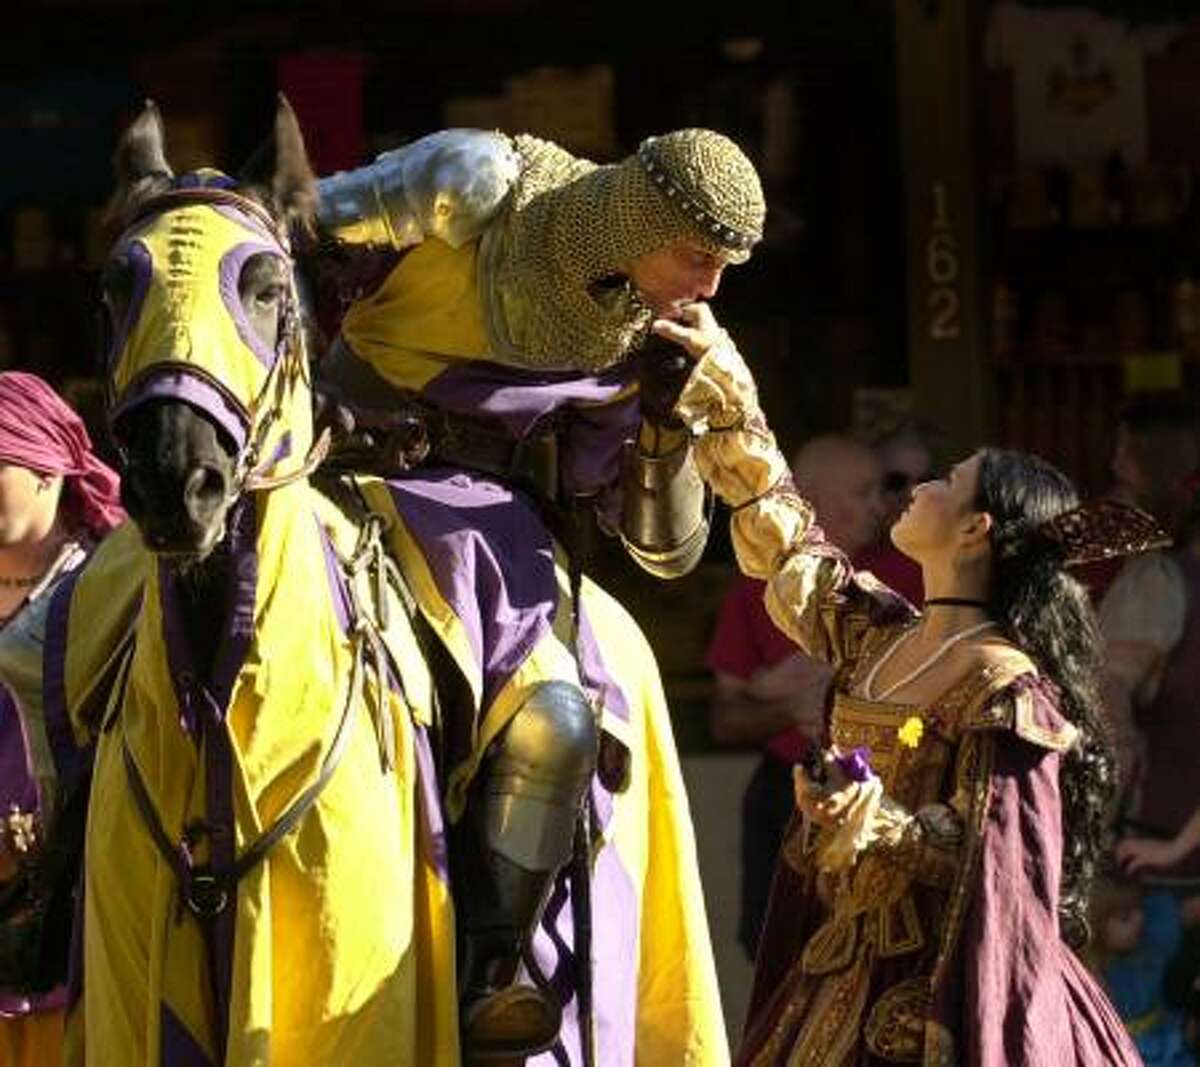 Knight Don Rodrigo Duke of Santiago, played by Chris Mitri Dynneson, kisses the hand of Dona de Salamanco, played by Sylvia Salamanca during the opening ceremony at the Texas Renaissance Festival in 2003.